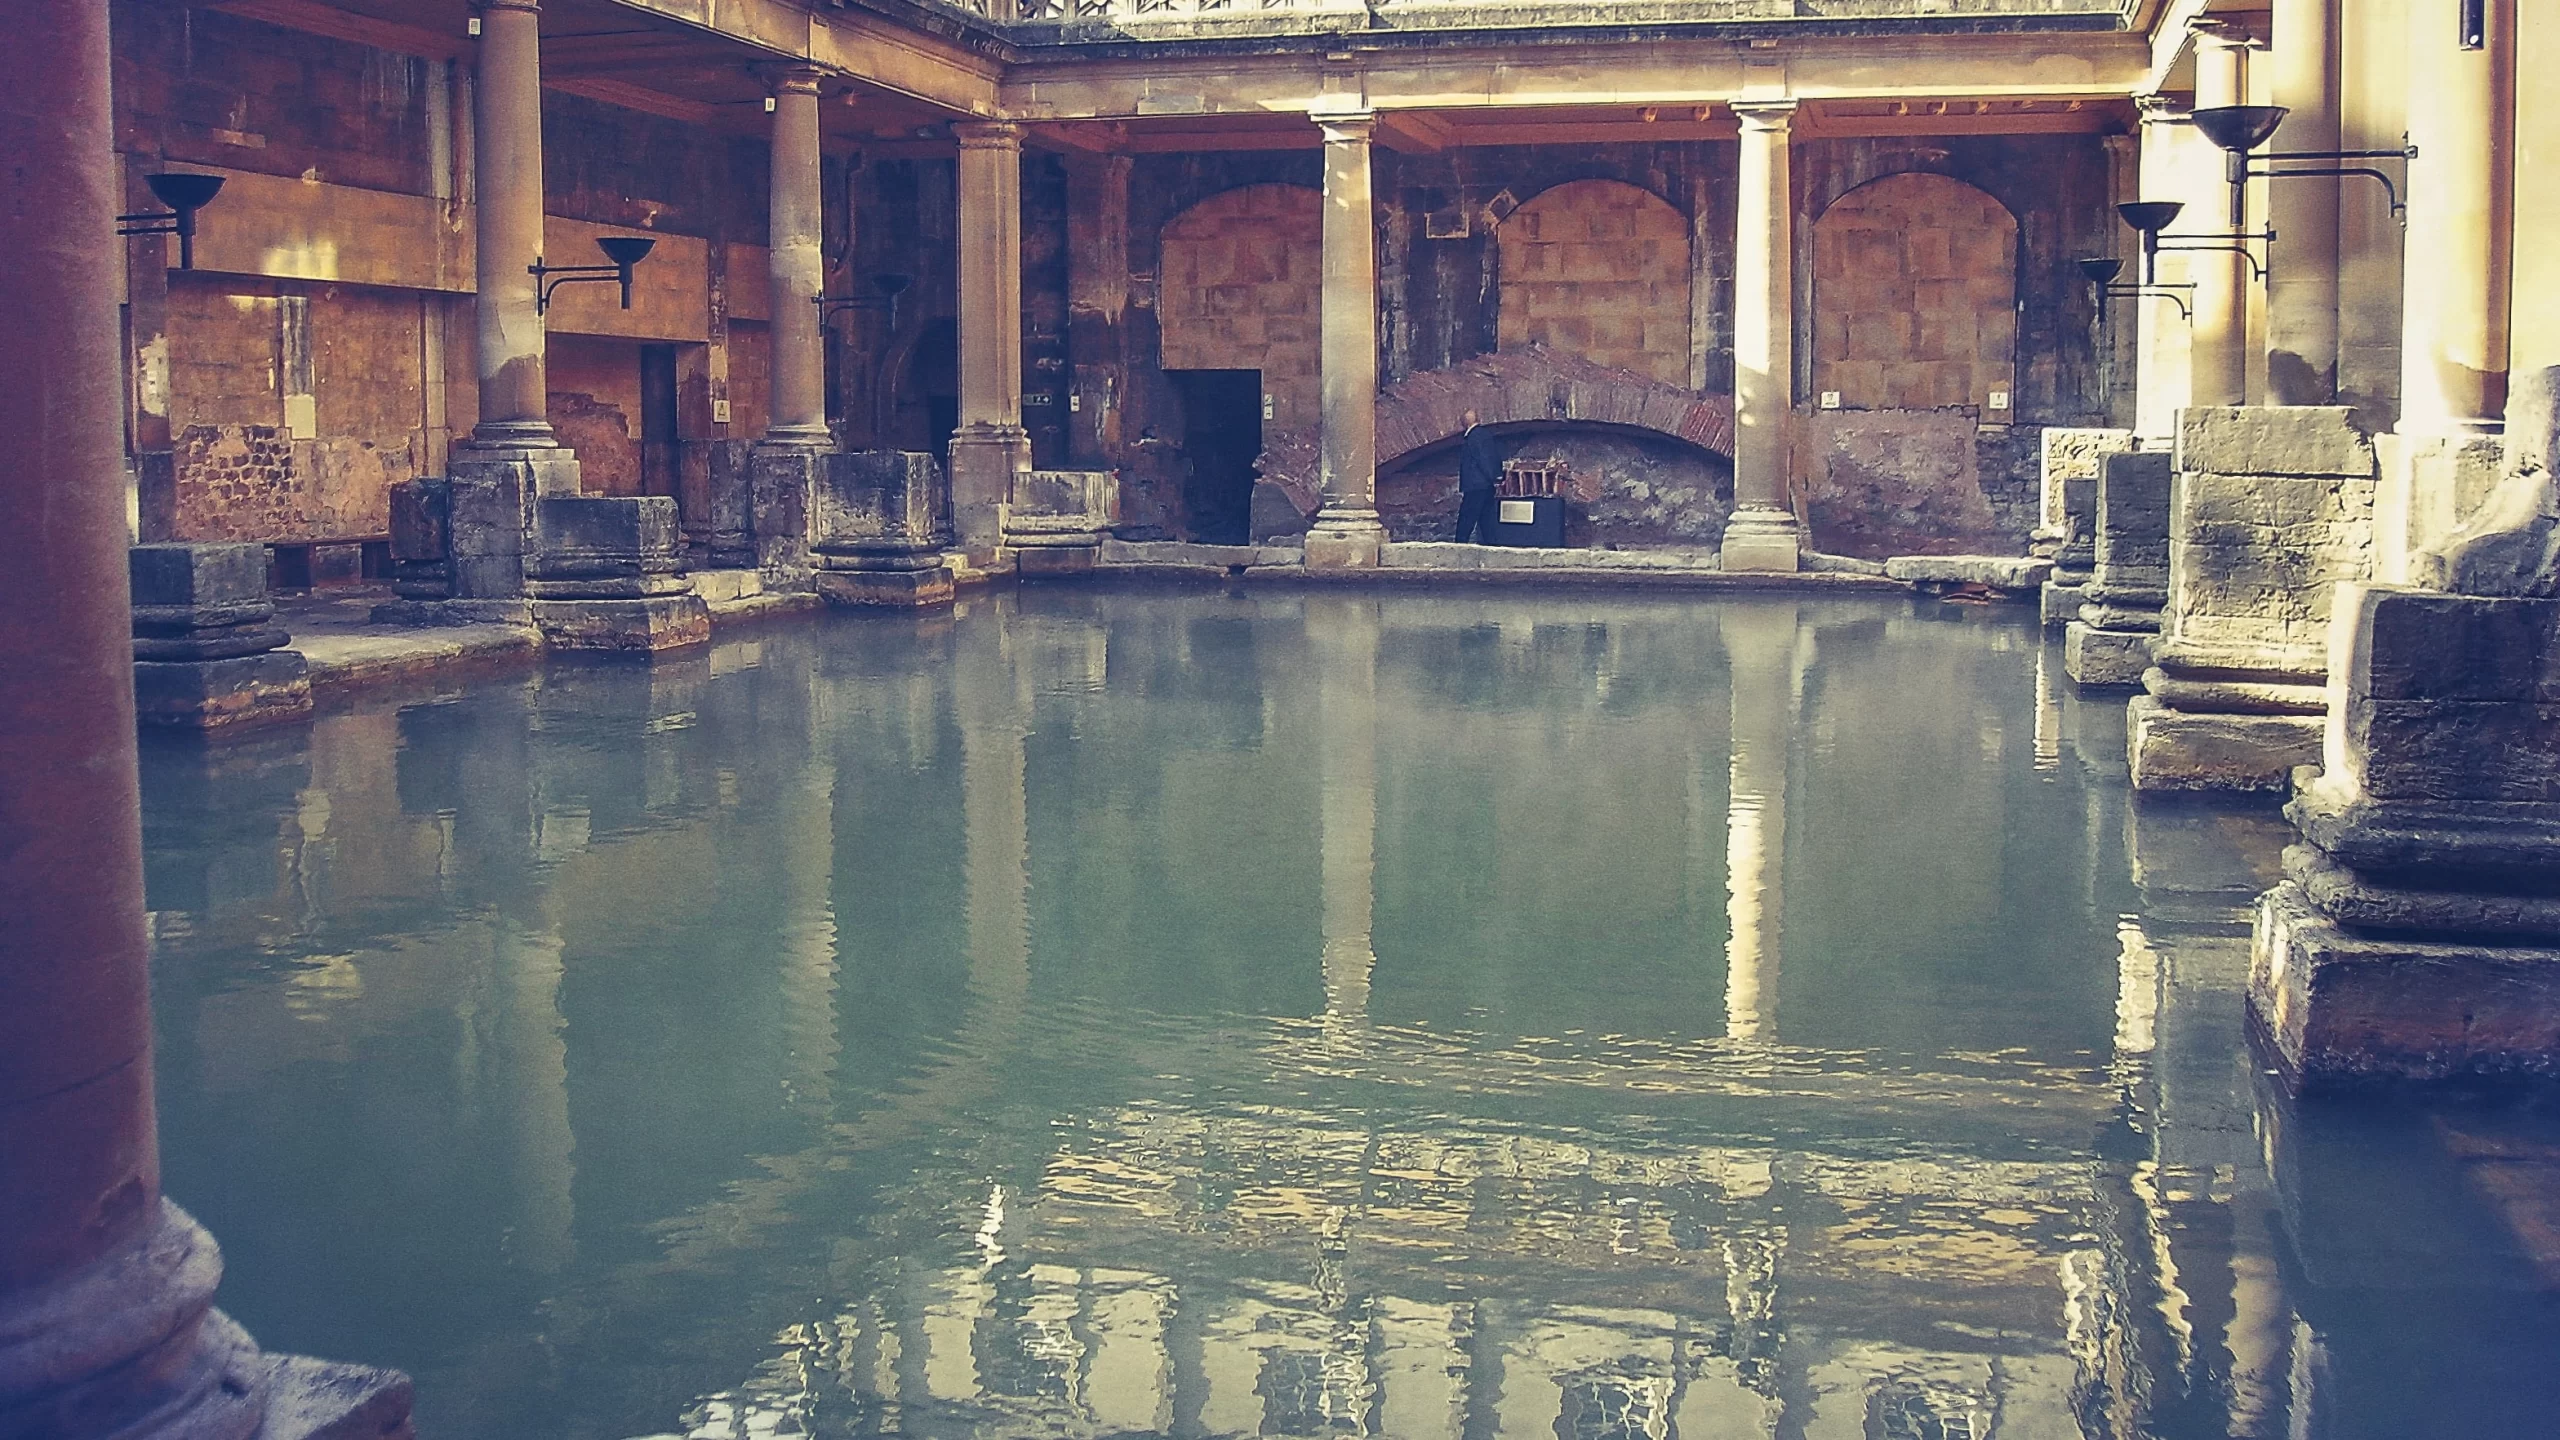 Editorial The Roman Baths, Bath, England Published on April 12, 2019 Canon, EOS 600D Free to use under the Unsplash License